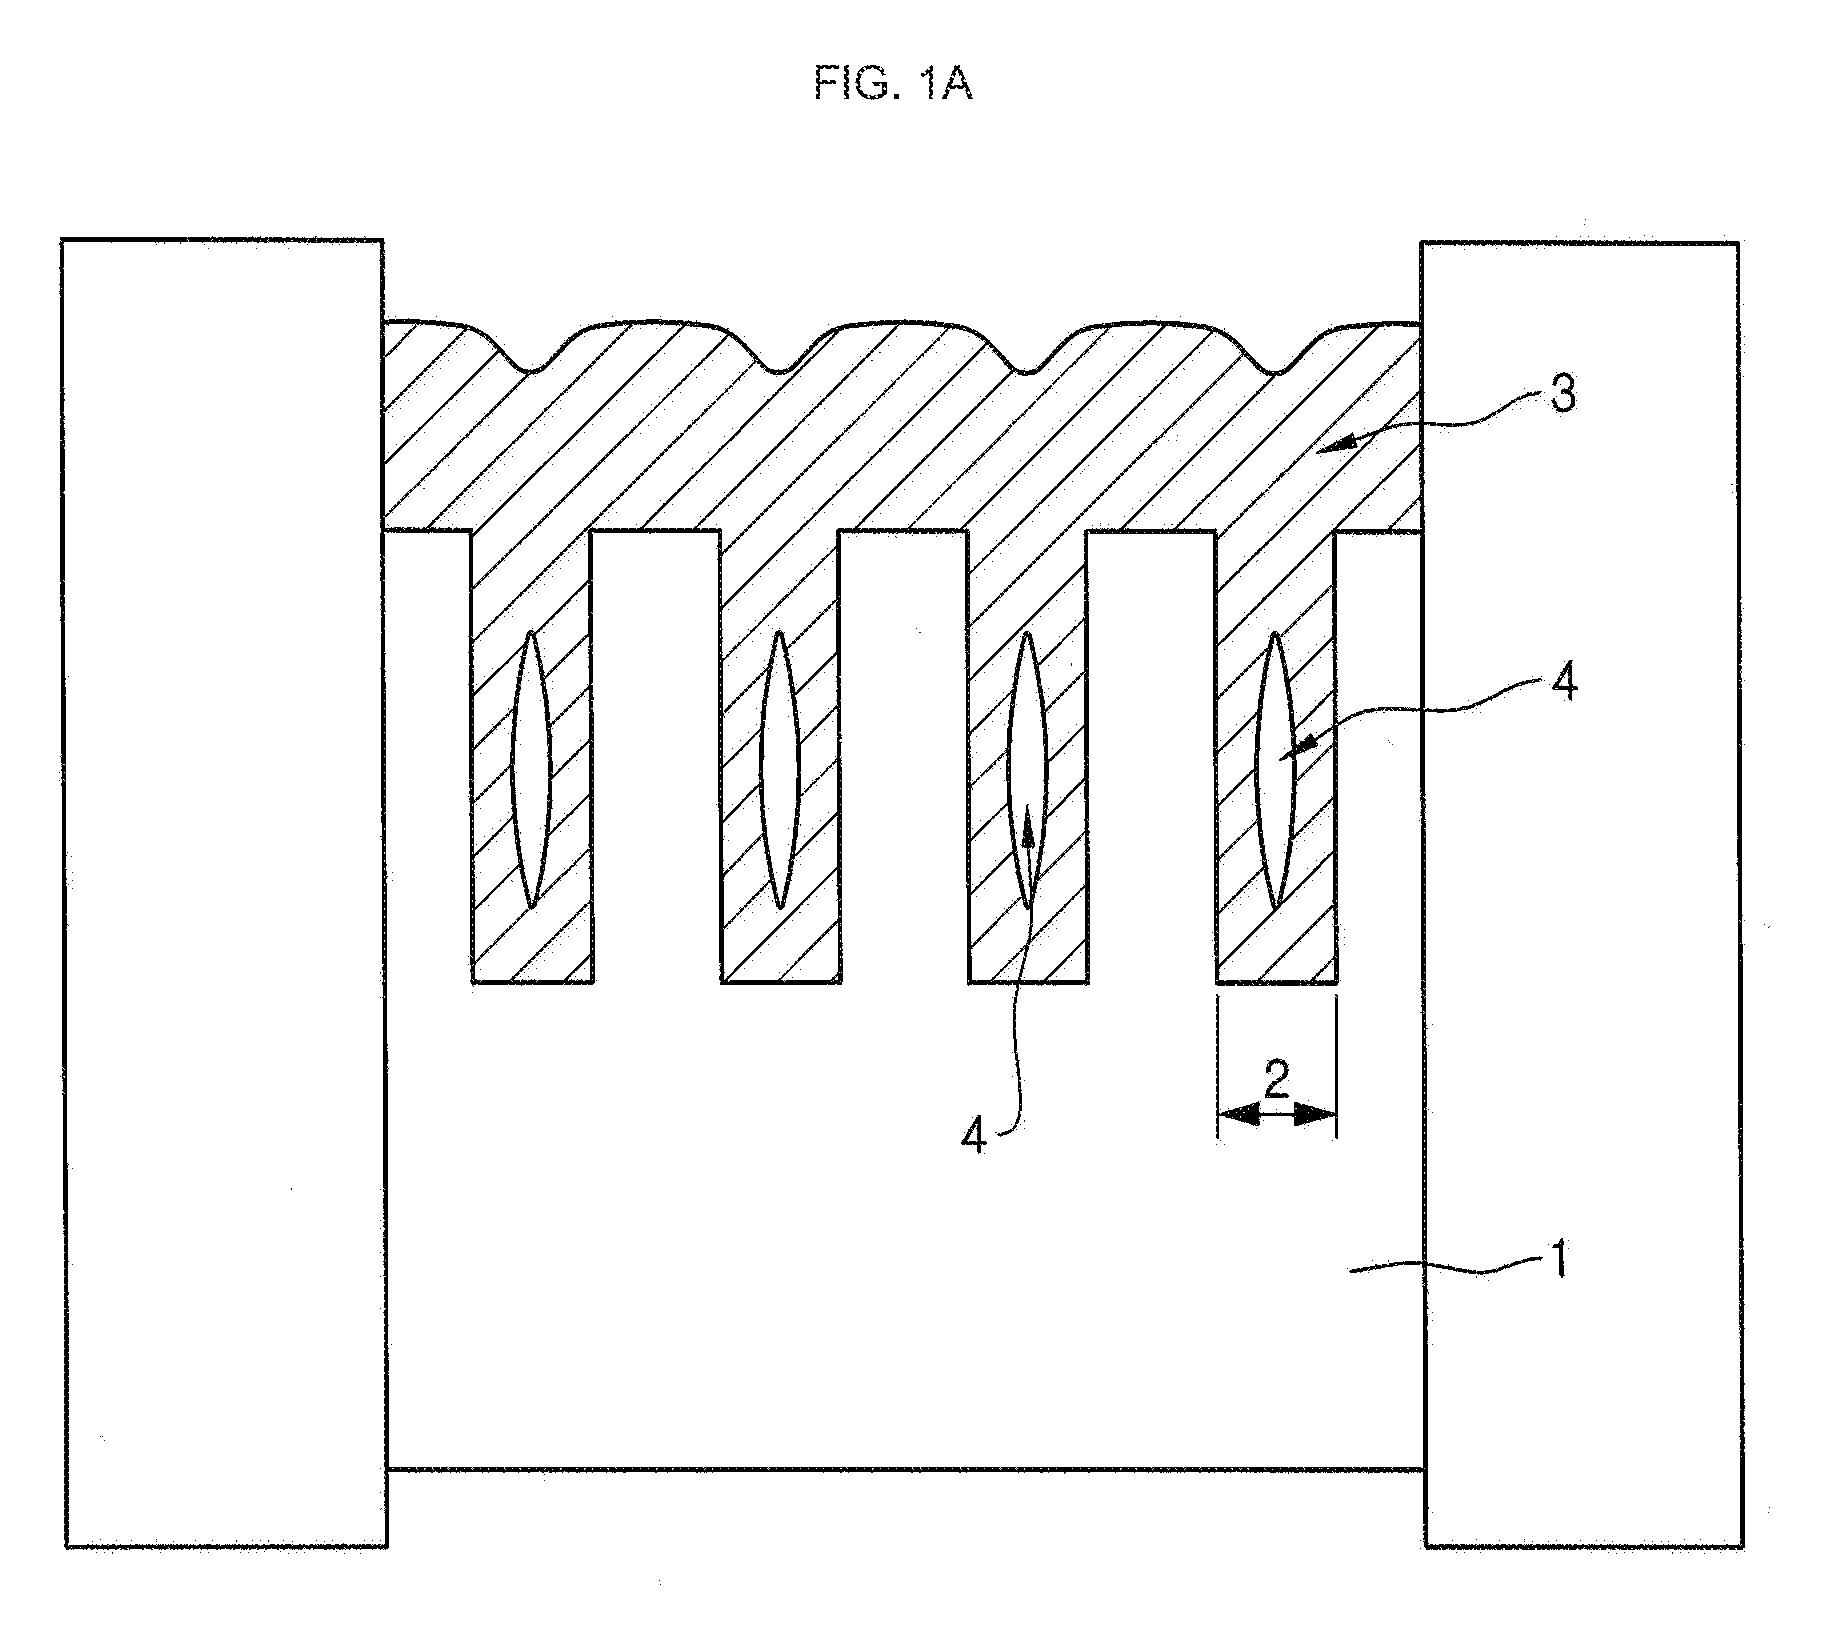 Forming Substrate Structure by Filling Recesses with Deposition Material